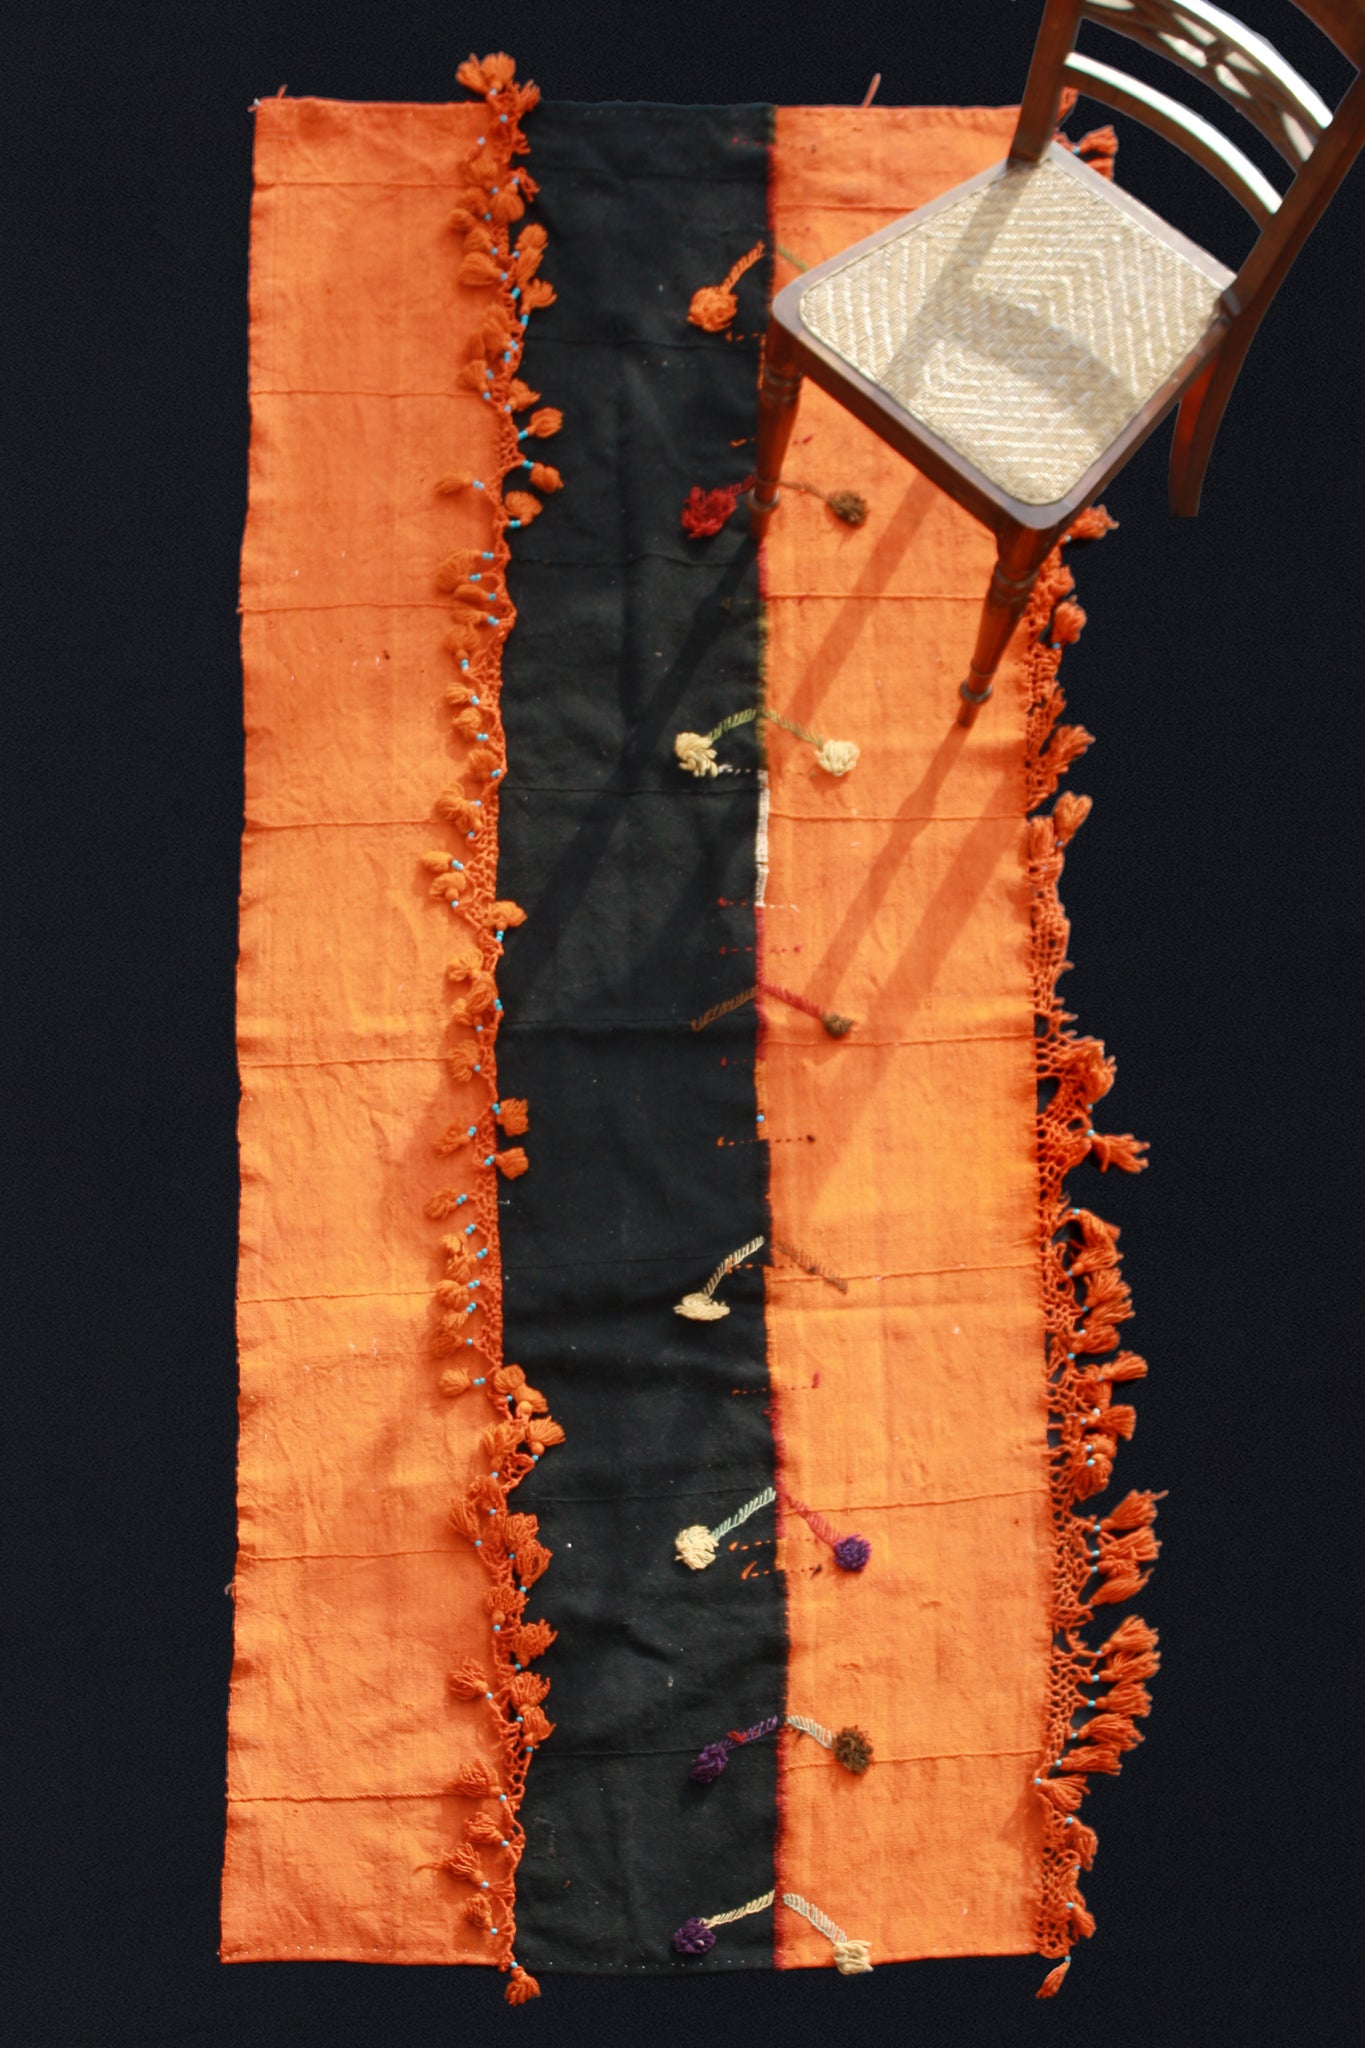 Sevas Perde- Orange With Black Center And Fringe With Blue Beads (3' 7" x 9' 7")